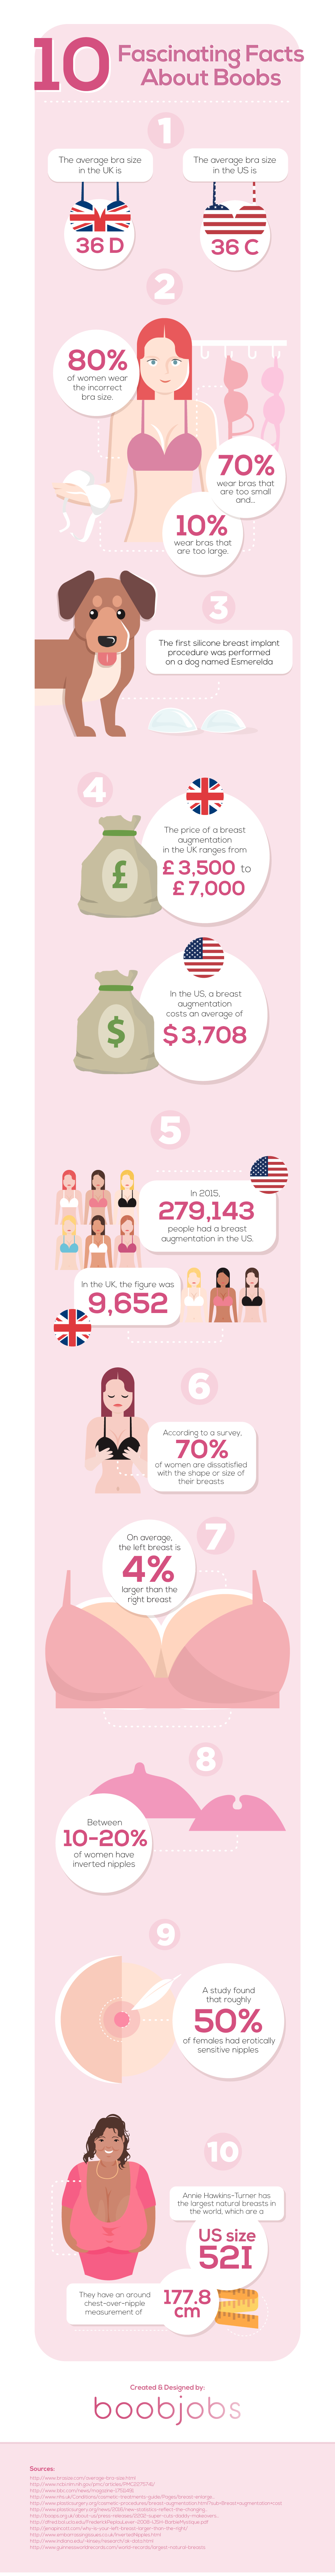 10 Fascinating Facts About Boobs